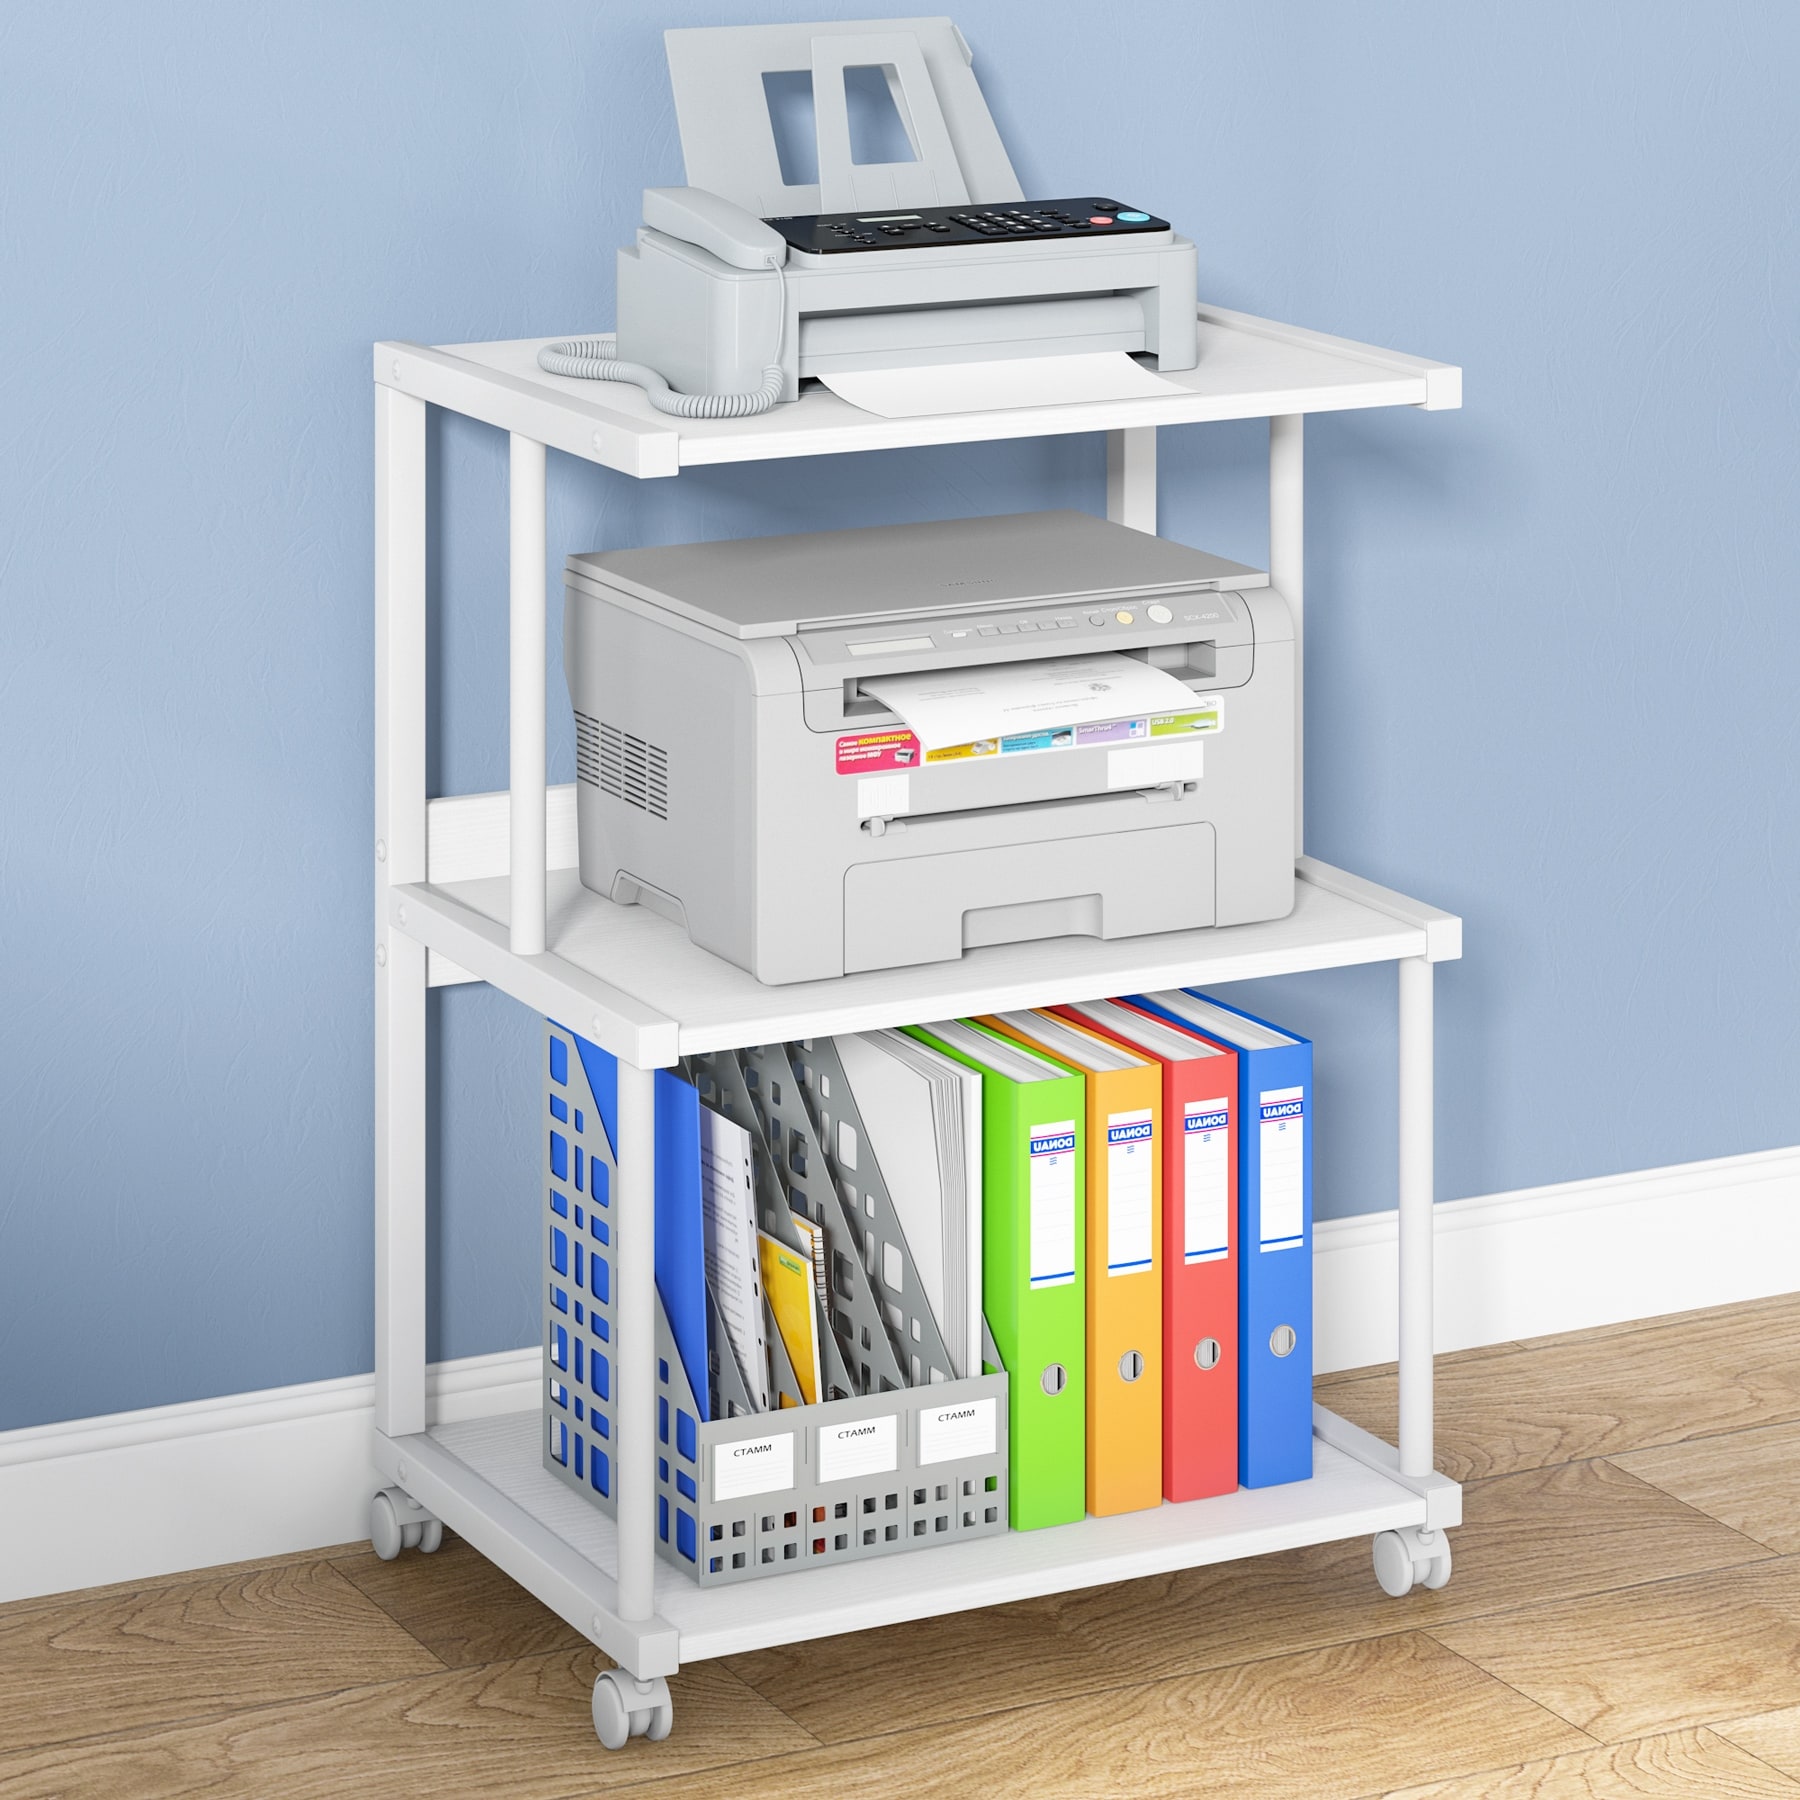 https://ak1.ostkcdn.com/images/products/is/images/direct/0a1c306faec05552eef2bce1e384c0283fd8528c/3-Shelf-Mobile-Printer-Stand-with-Storage-Shelves%2C-Rolling-Printer-Cart-Machine-Stand-for-Office.jpg